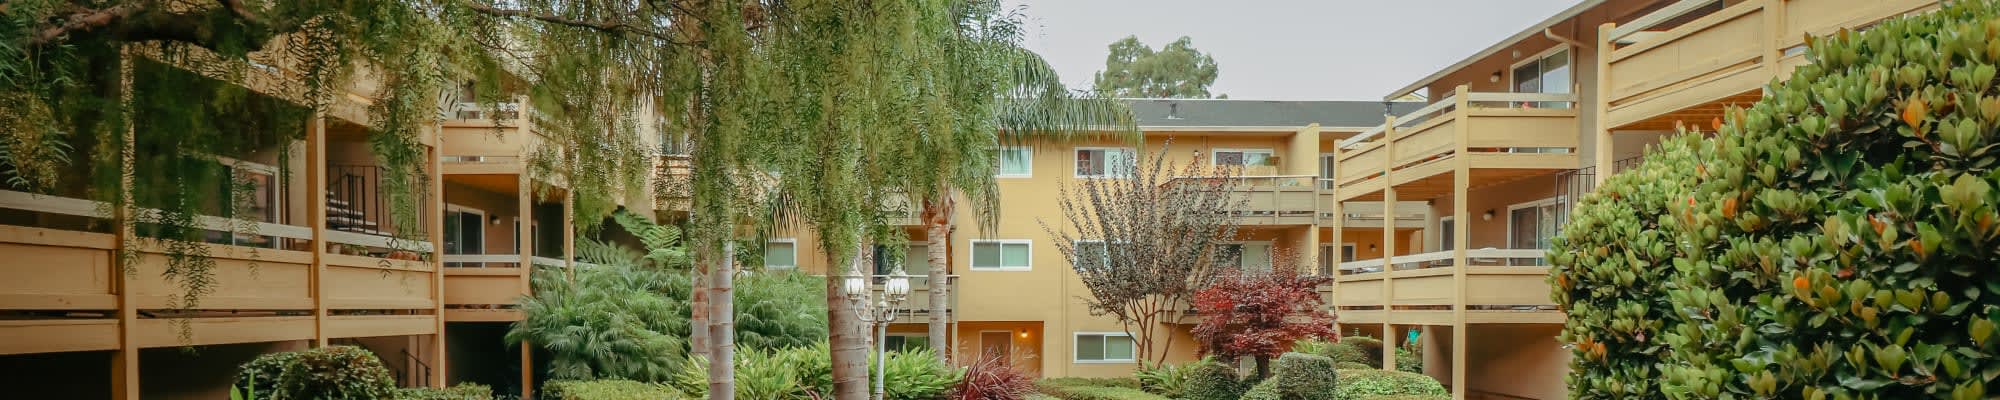 Courtyard with trees and balconies at Bayfair Apartments in San Lorenzo, California